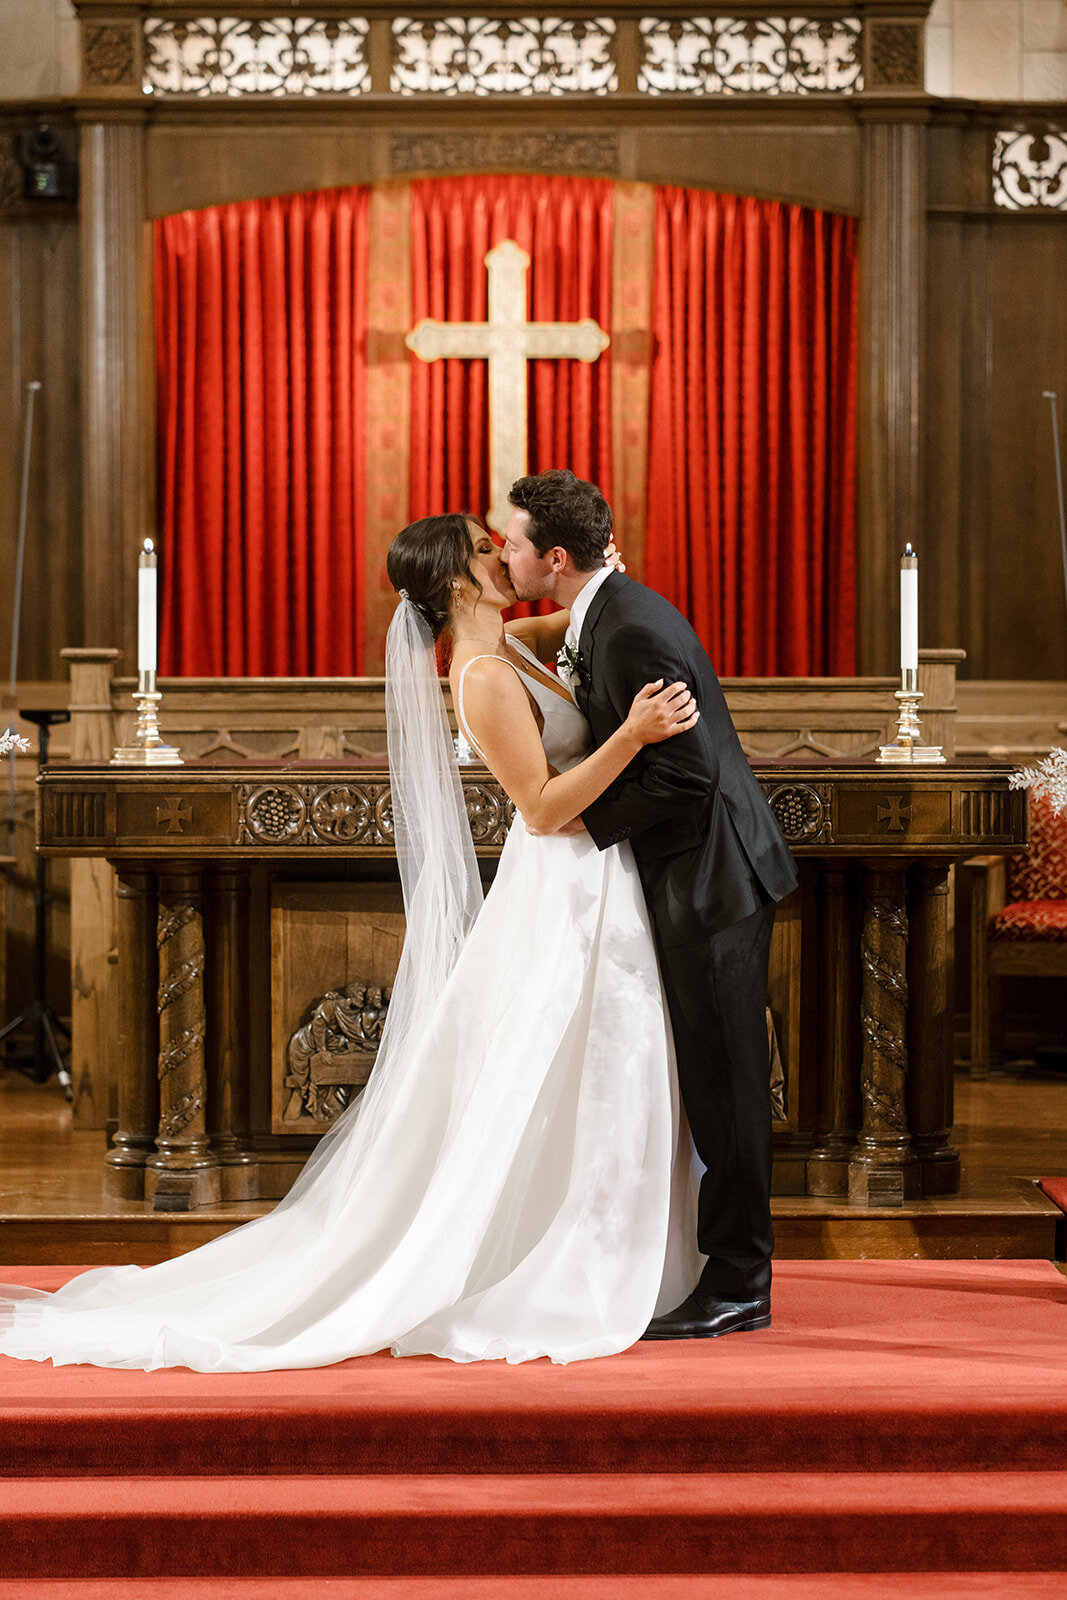 Kylie and Jack at The Grand Hall - Kansas City Wedding Photograpy - Nick and Lexie Photo Film-682